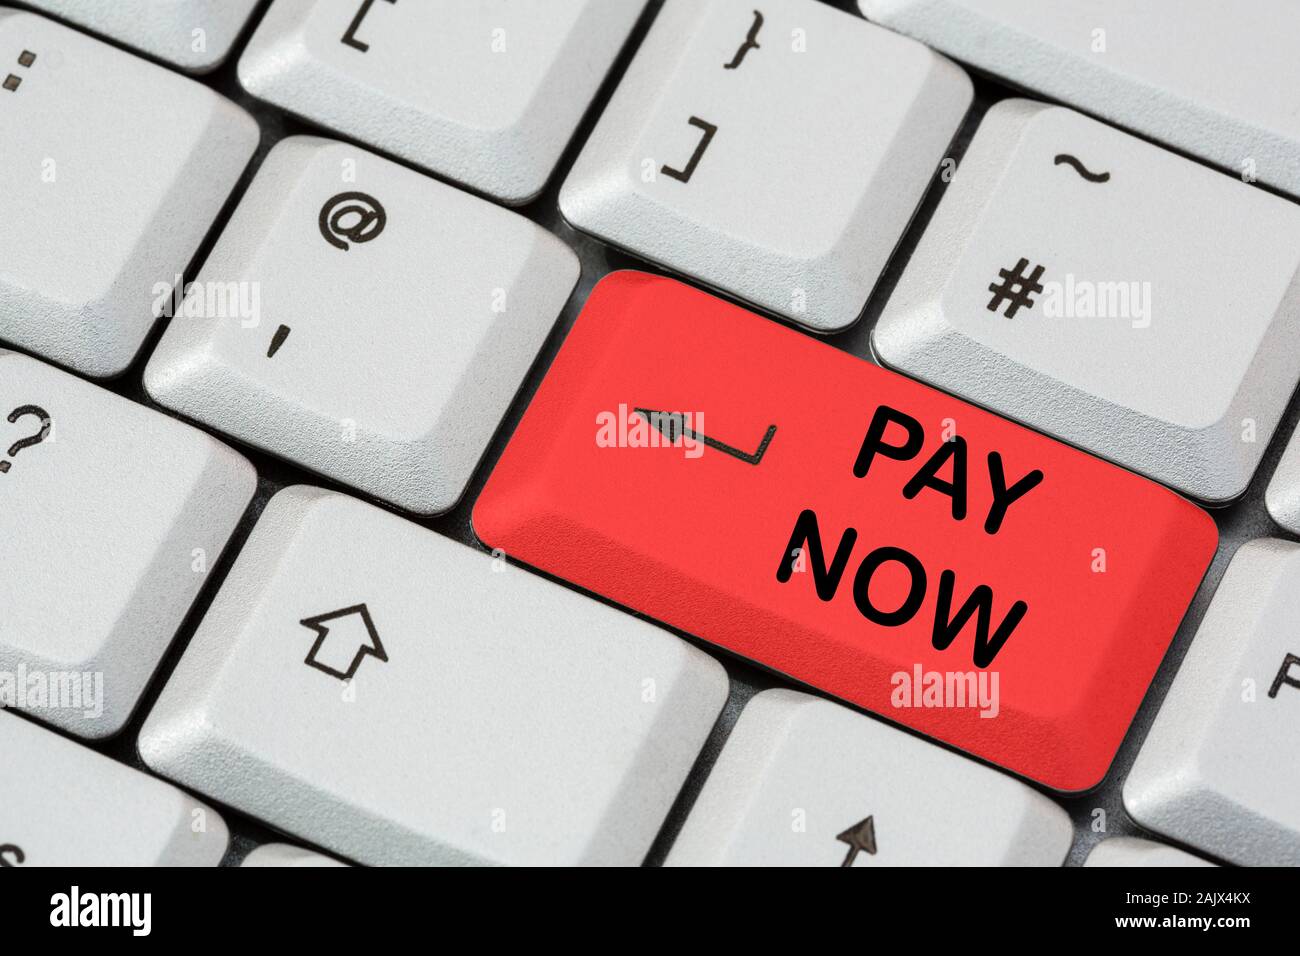 A keyboard with Pay Now written in black lettering on a red enter button. Online shopping, internet buying payment concept. England, UK, Britain Stock Photo